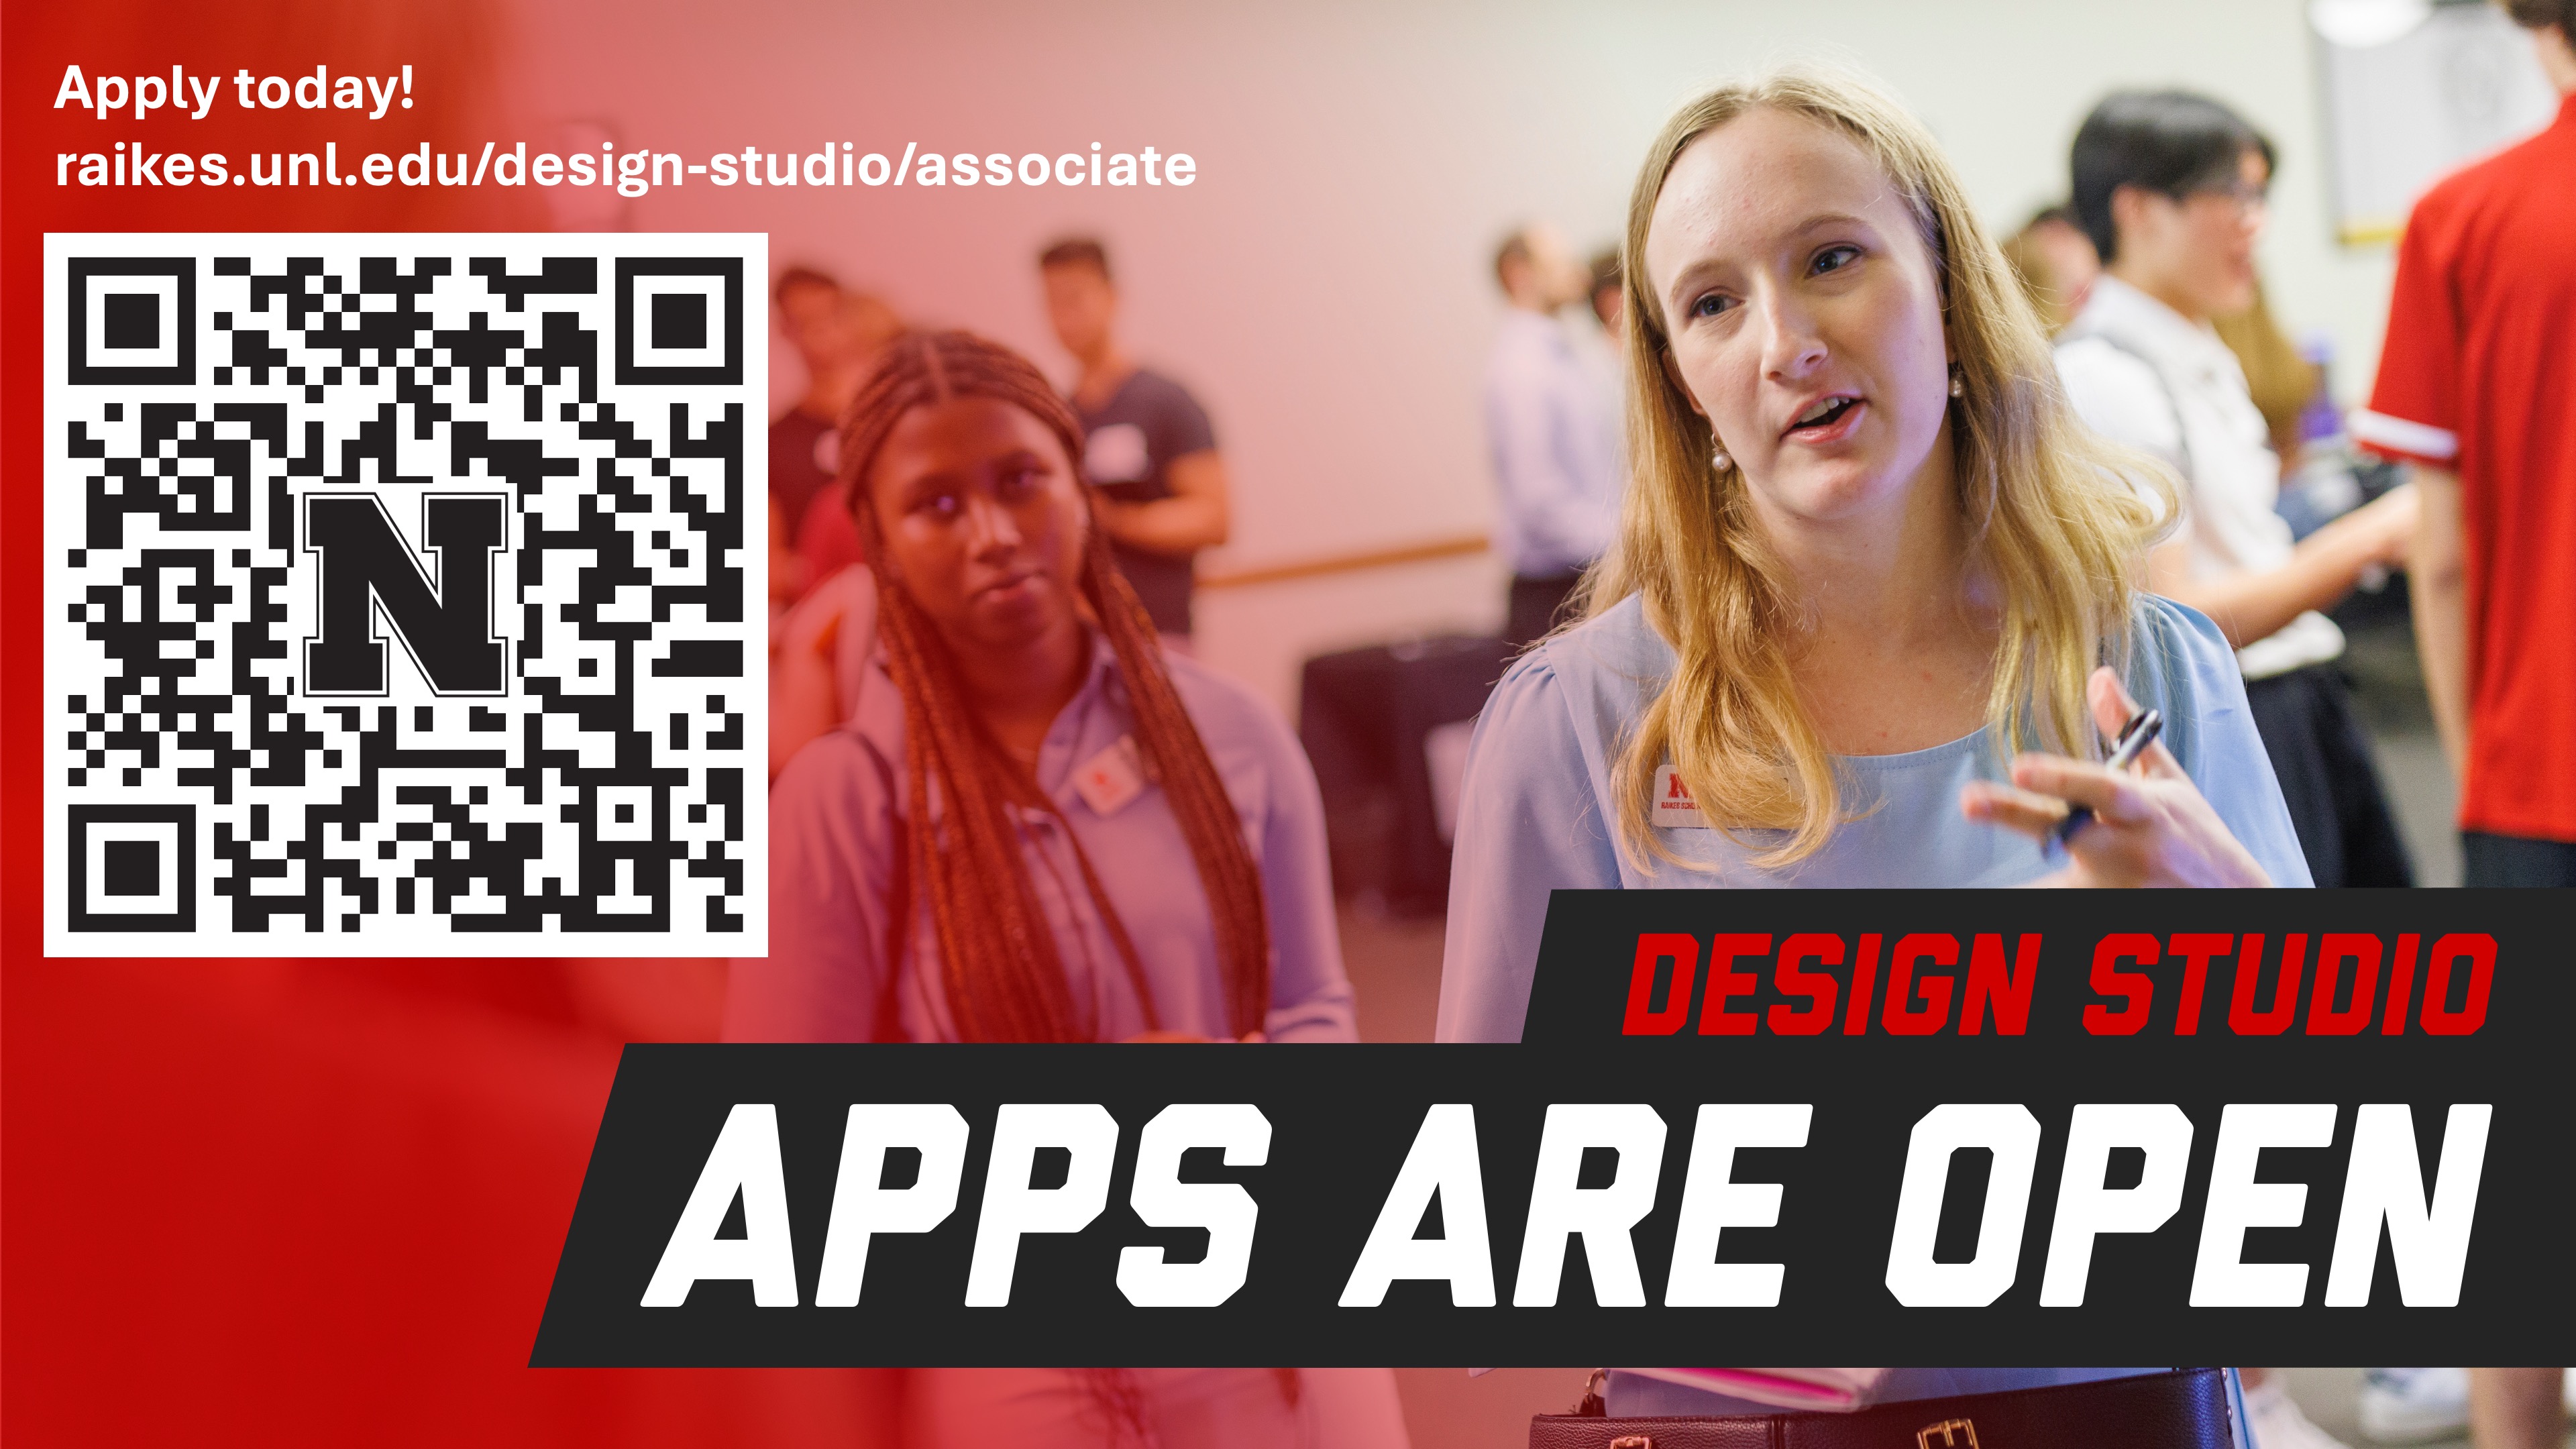 The Design Studio early application deadline is March 8.